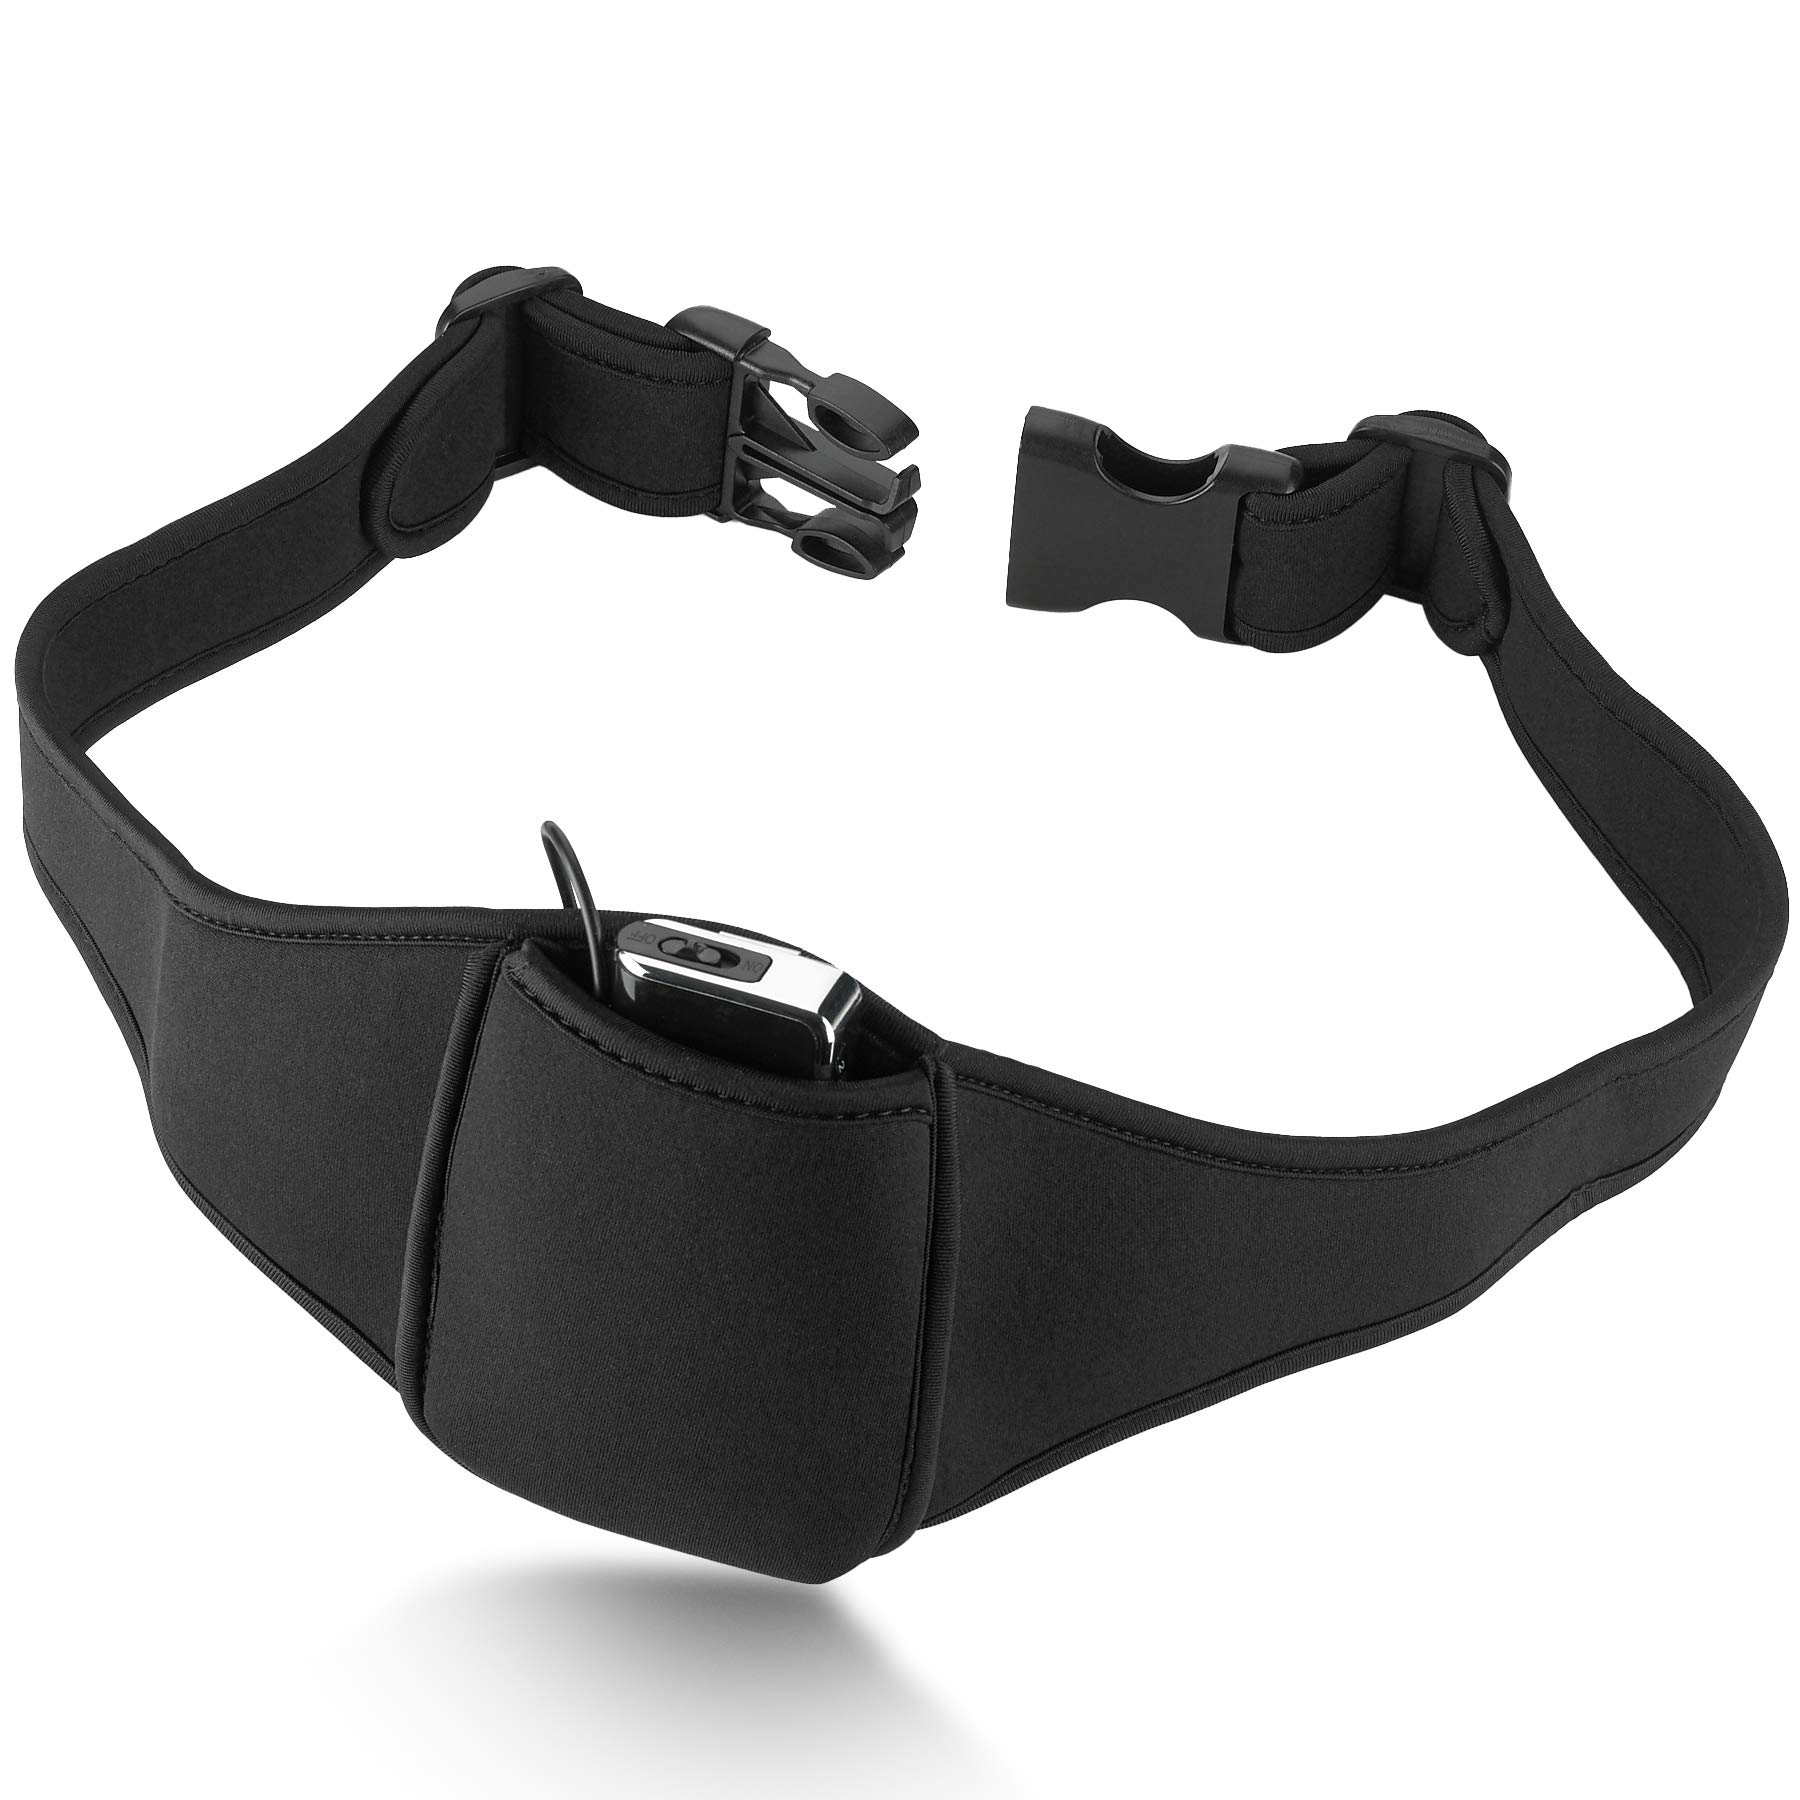 Vertical Carrier Belt for Mic Transmitters, for Fitness Instructors, Theater, and Presentations